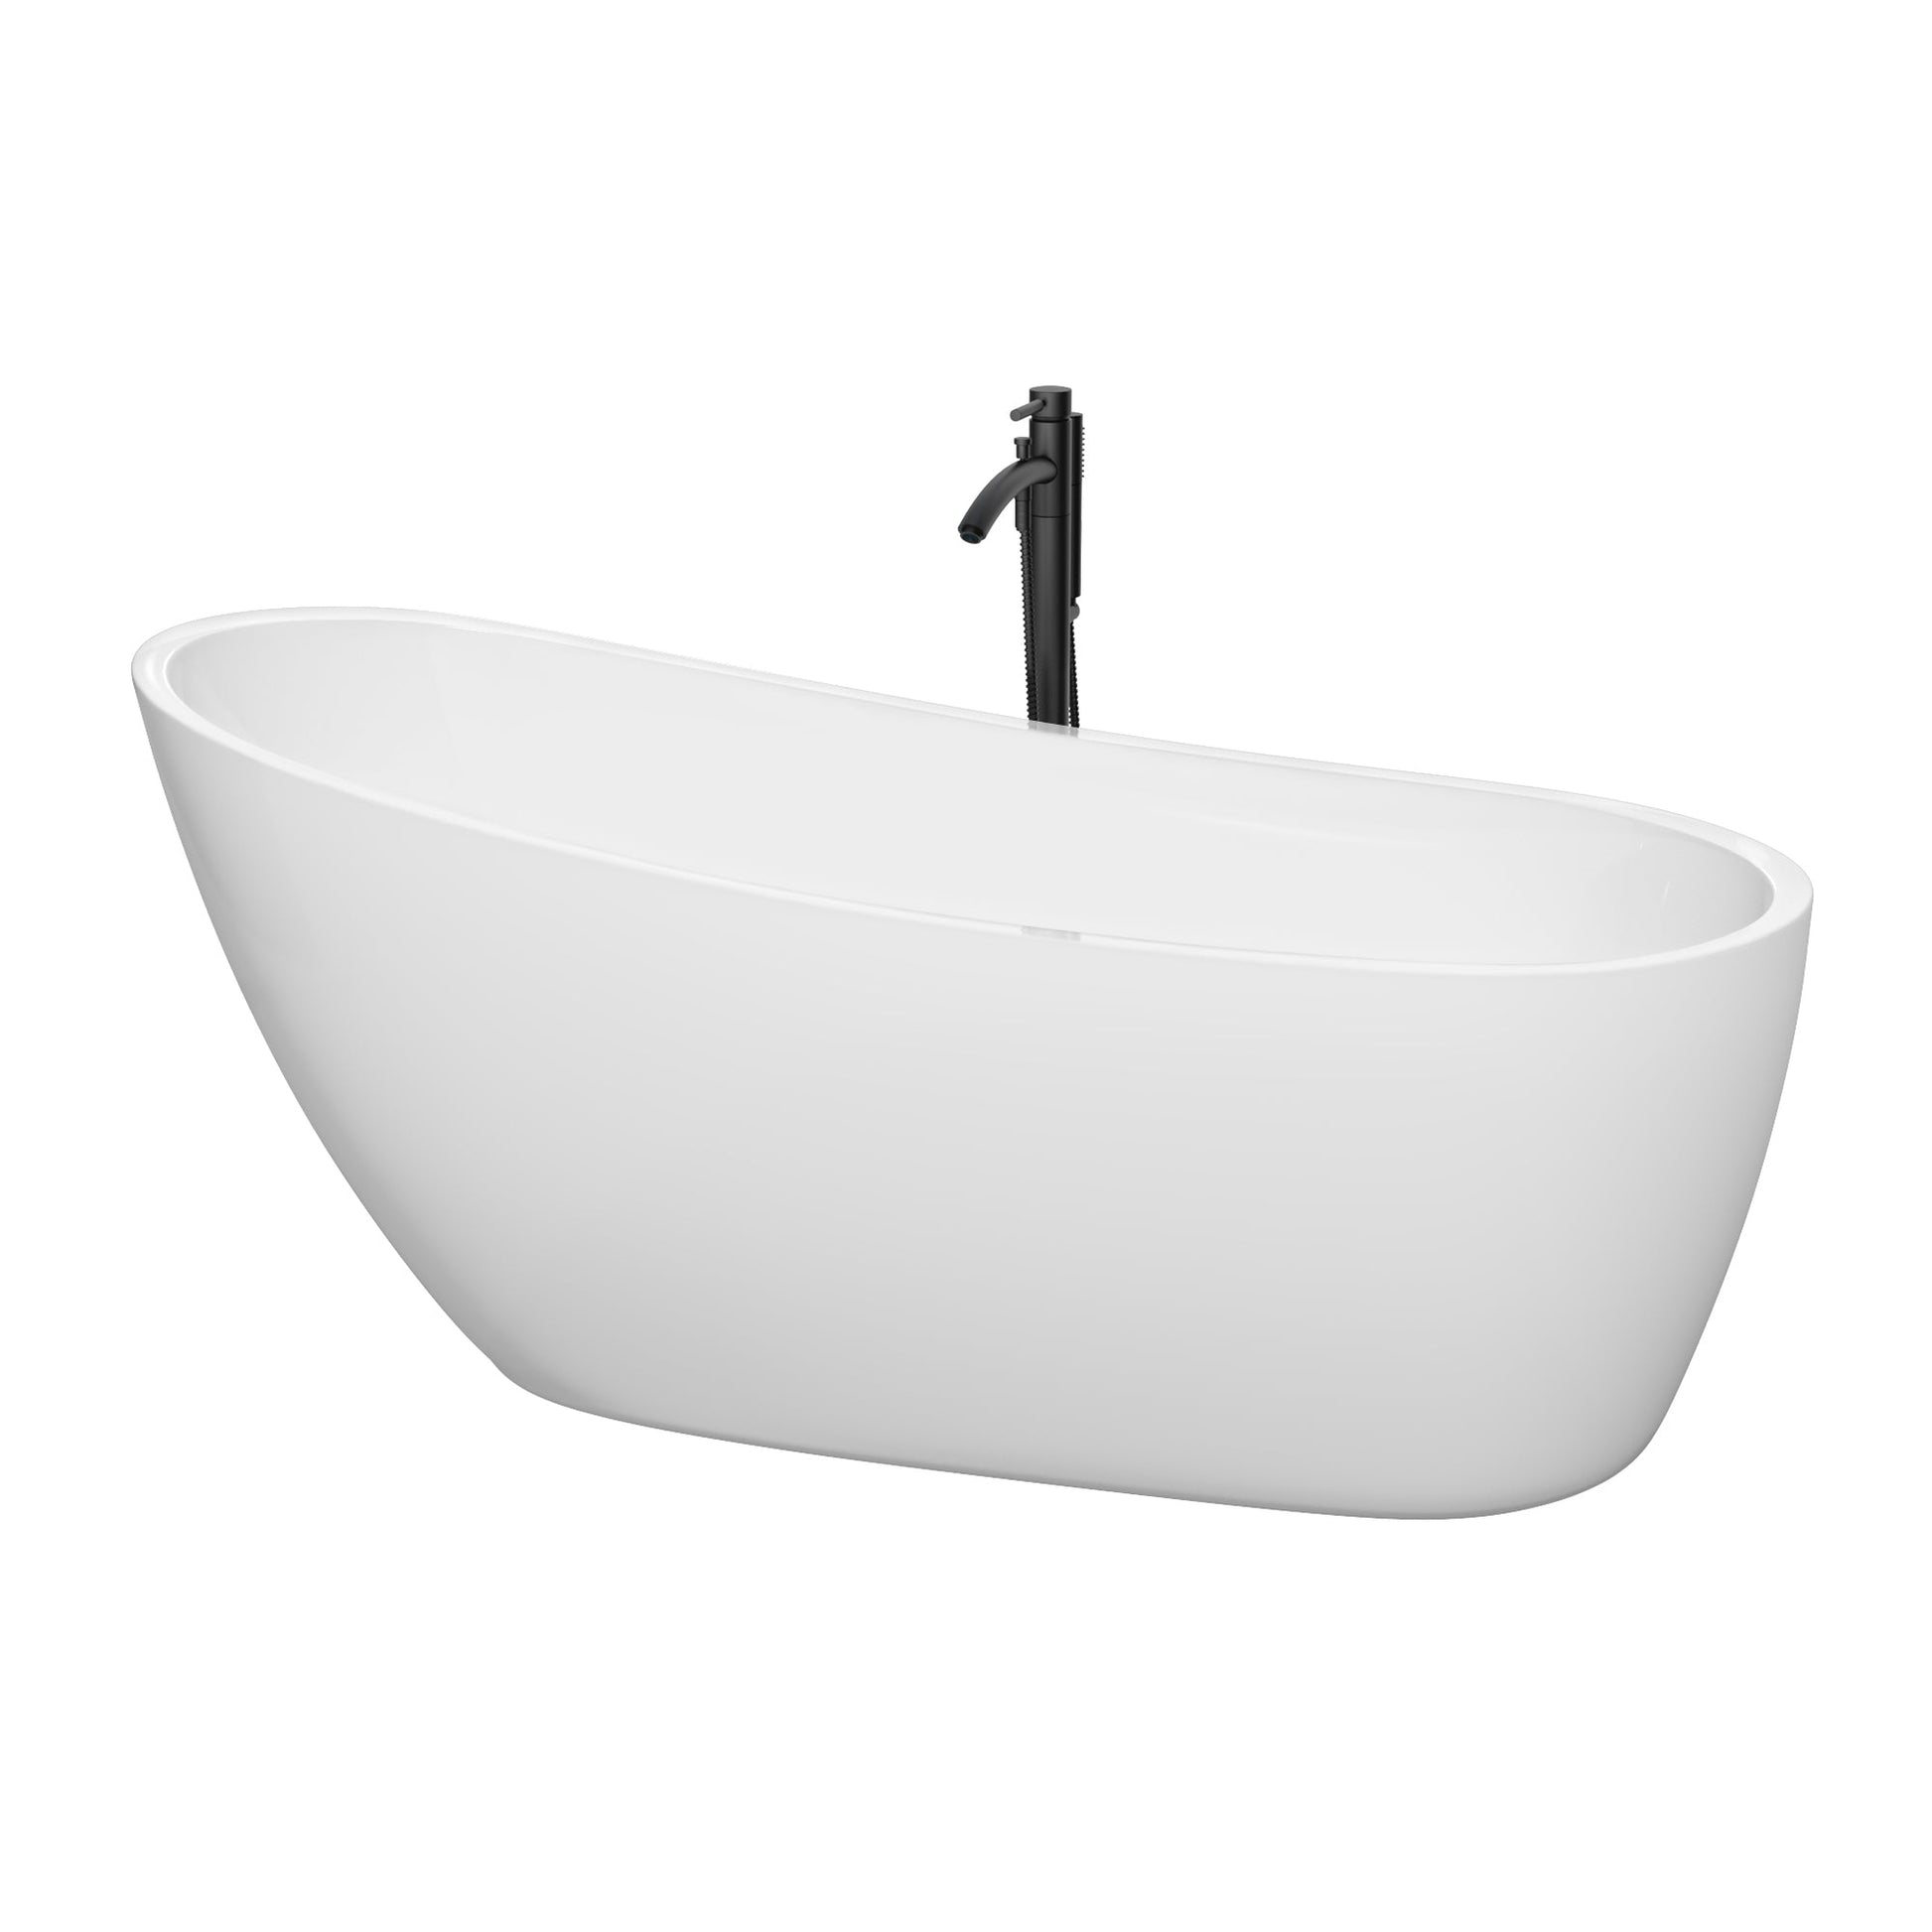 Wyndham Collection Florence 68" Freestanding Bathtub in White With Shiny White Trim and Floor Mounted Faucet in Matte Black